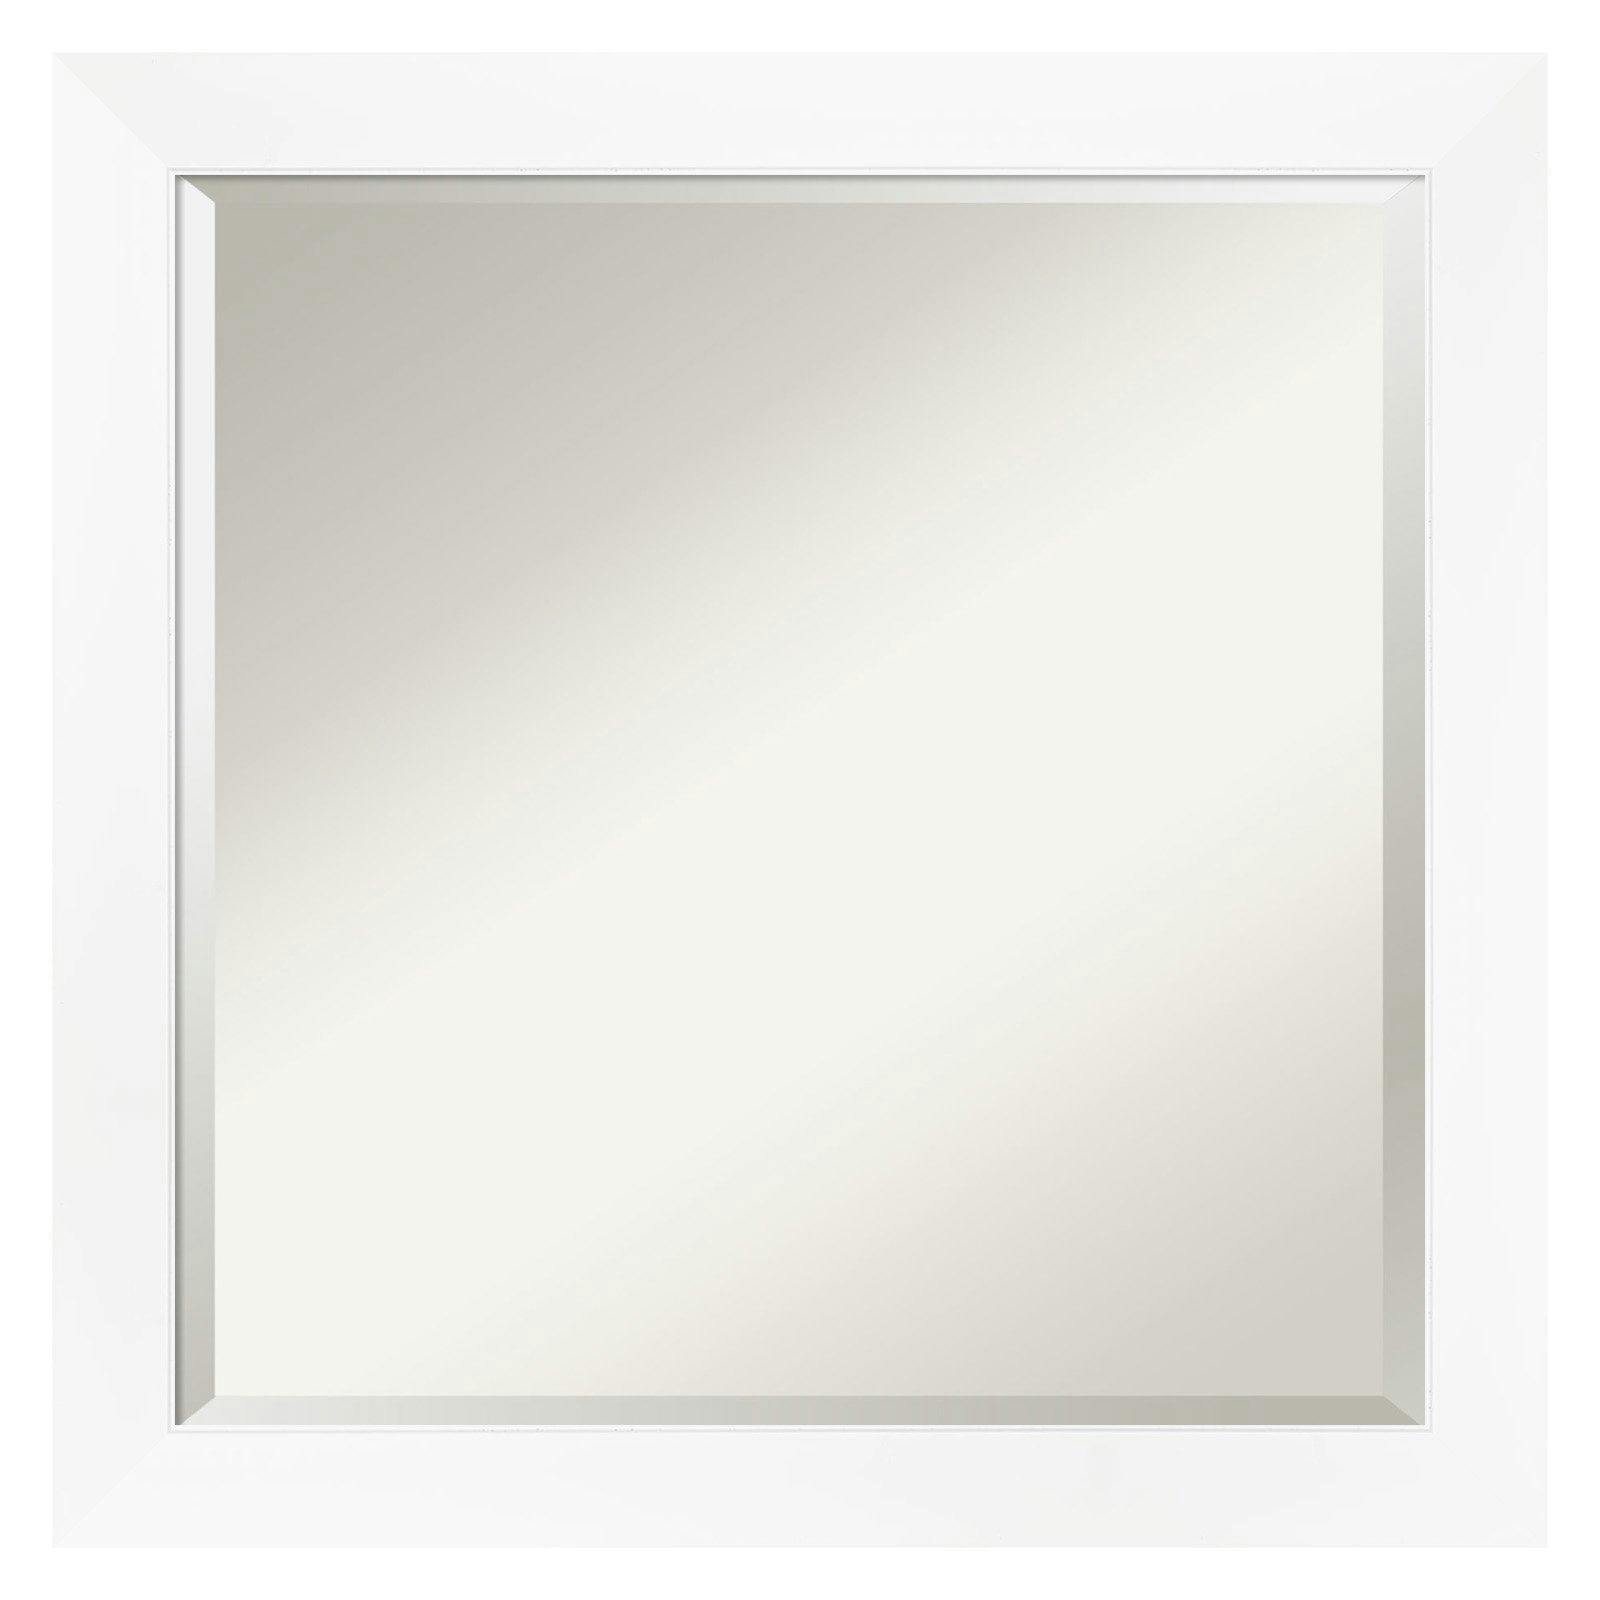 Contemporary White and Silver 23x23 Beveled Bathroom Vanity Mirror